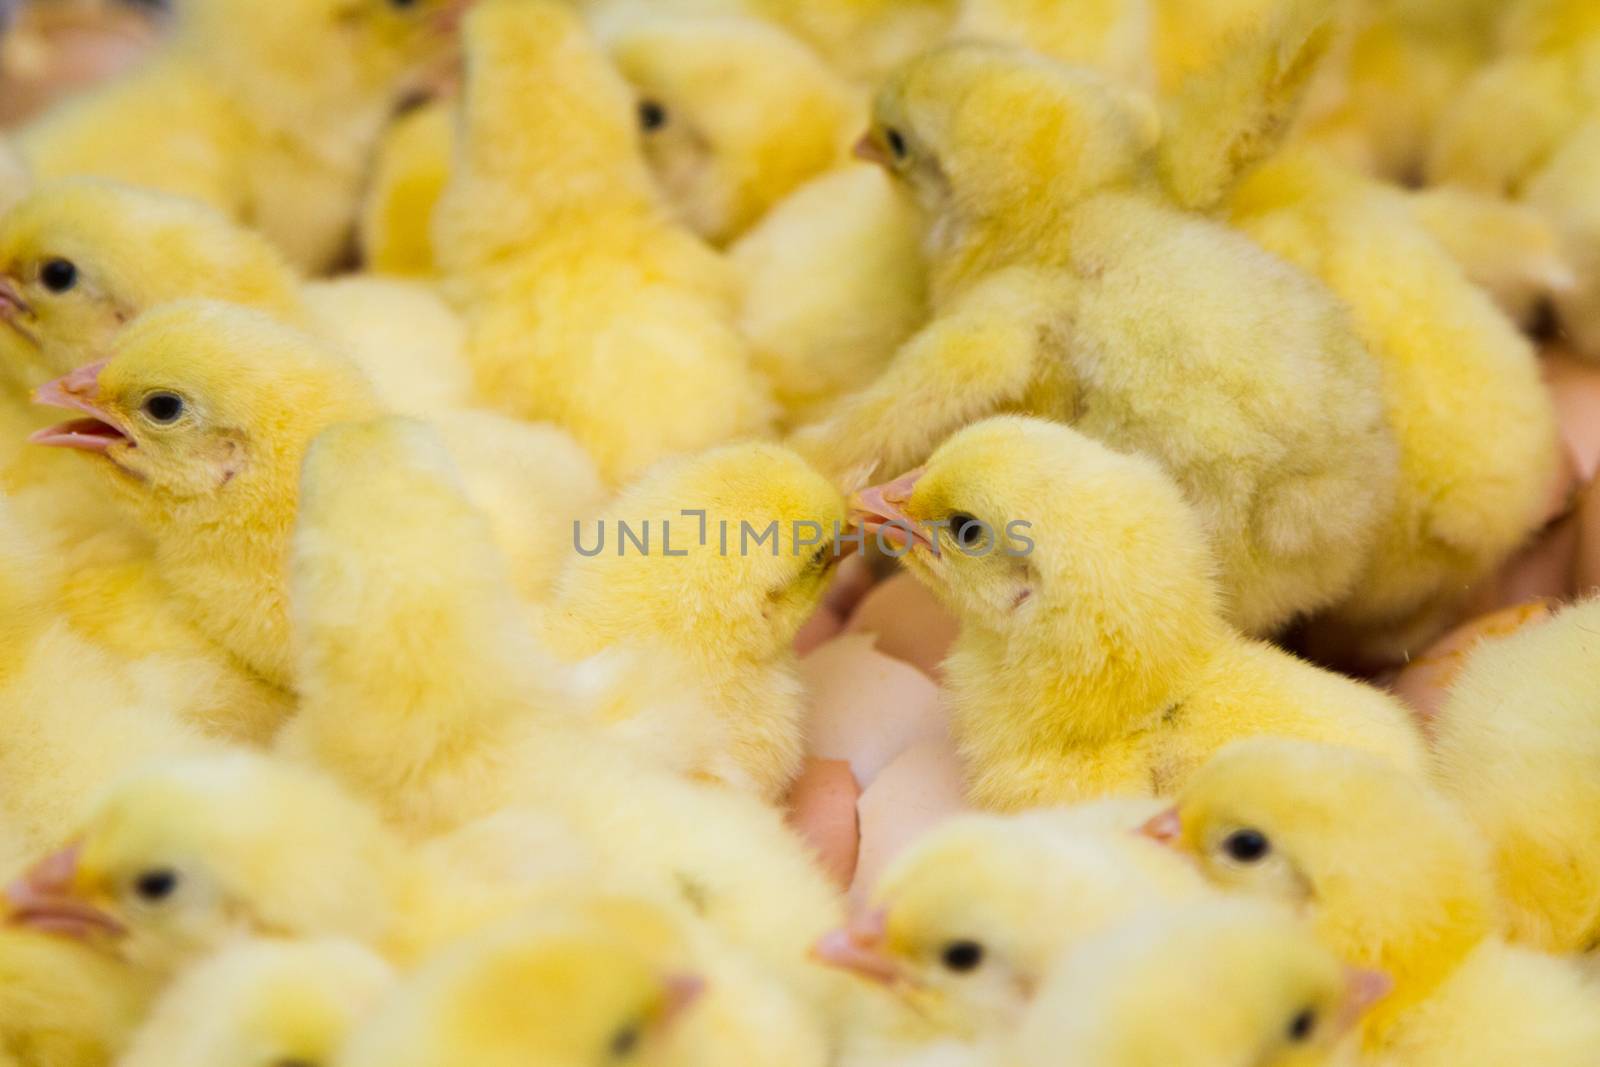 Newly hatched chicks by grigorenko